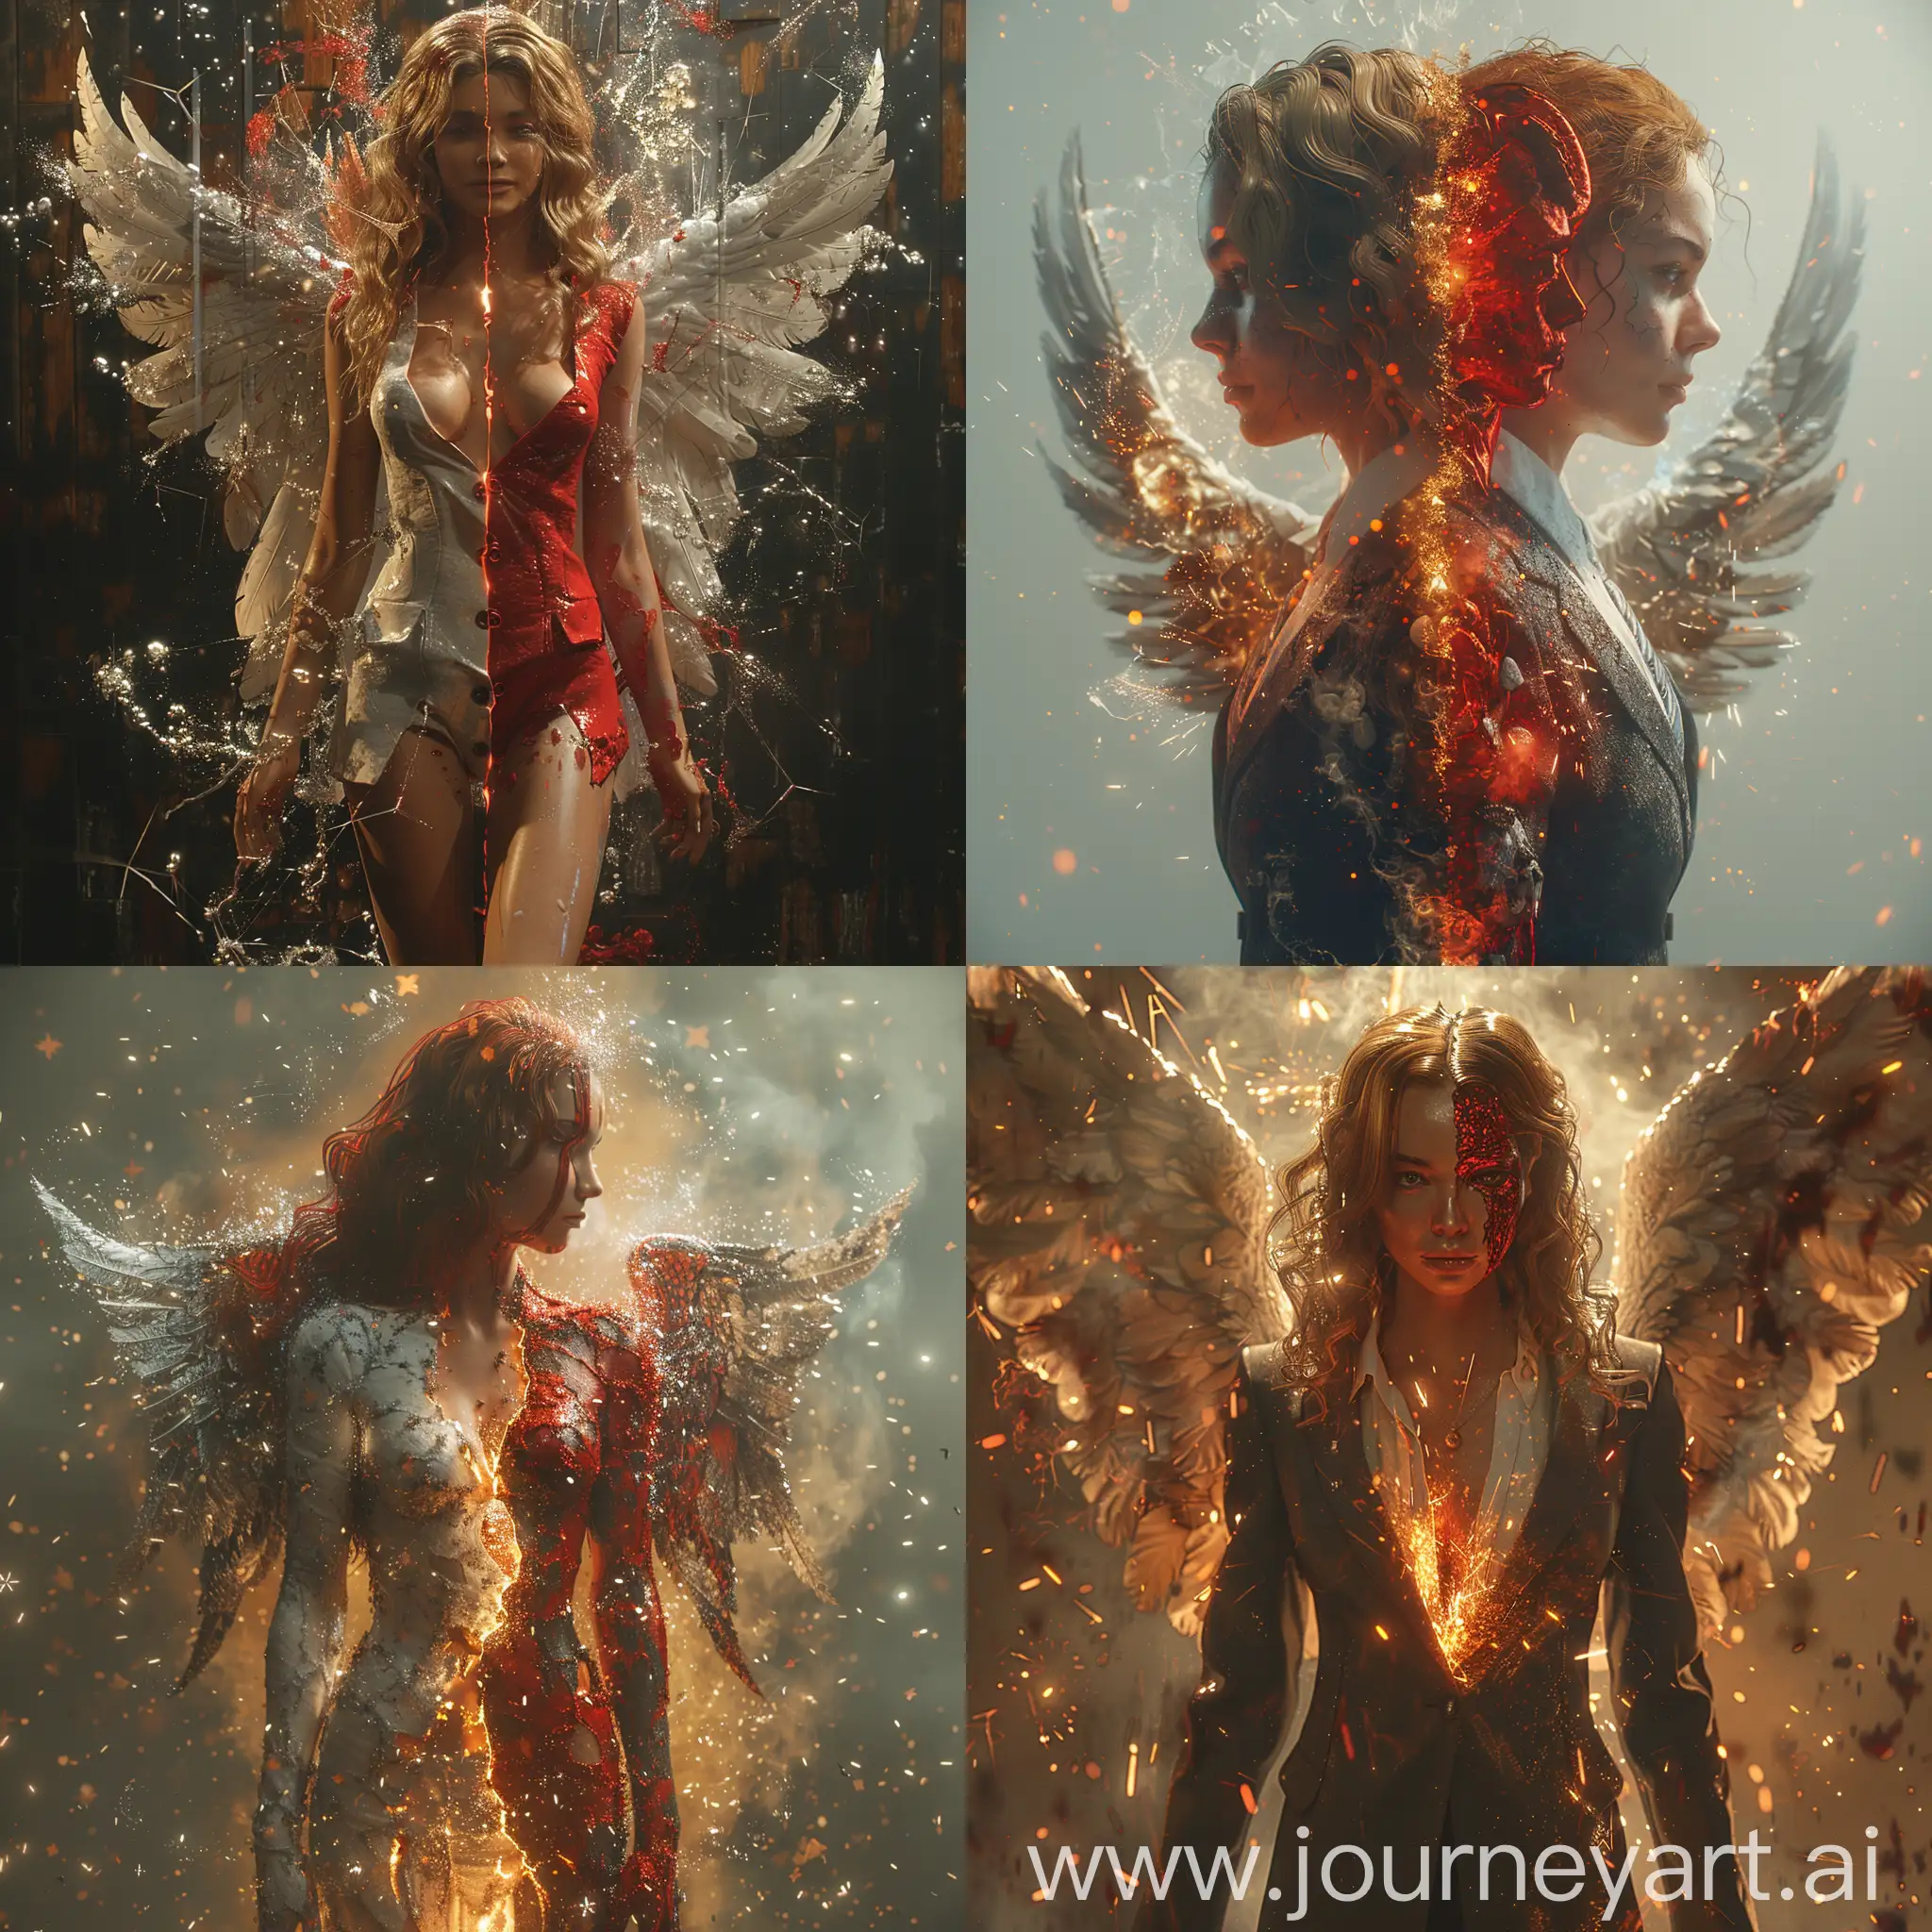 Ethereal-Triptych-Angelic-Human-and-Devilish-Forms-in-Hyperrealistic-3D-Digital-Art